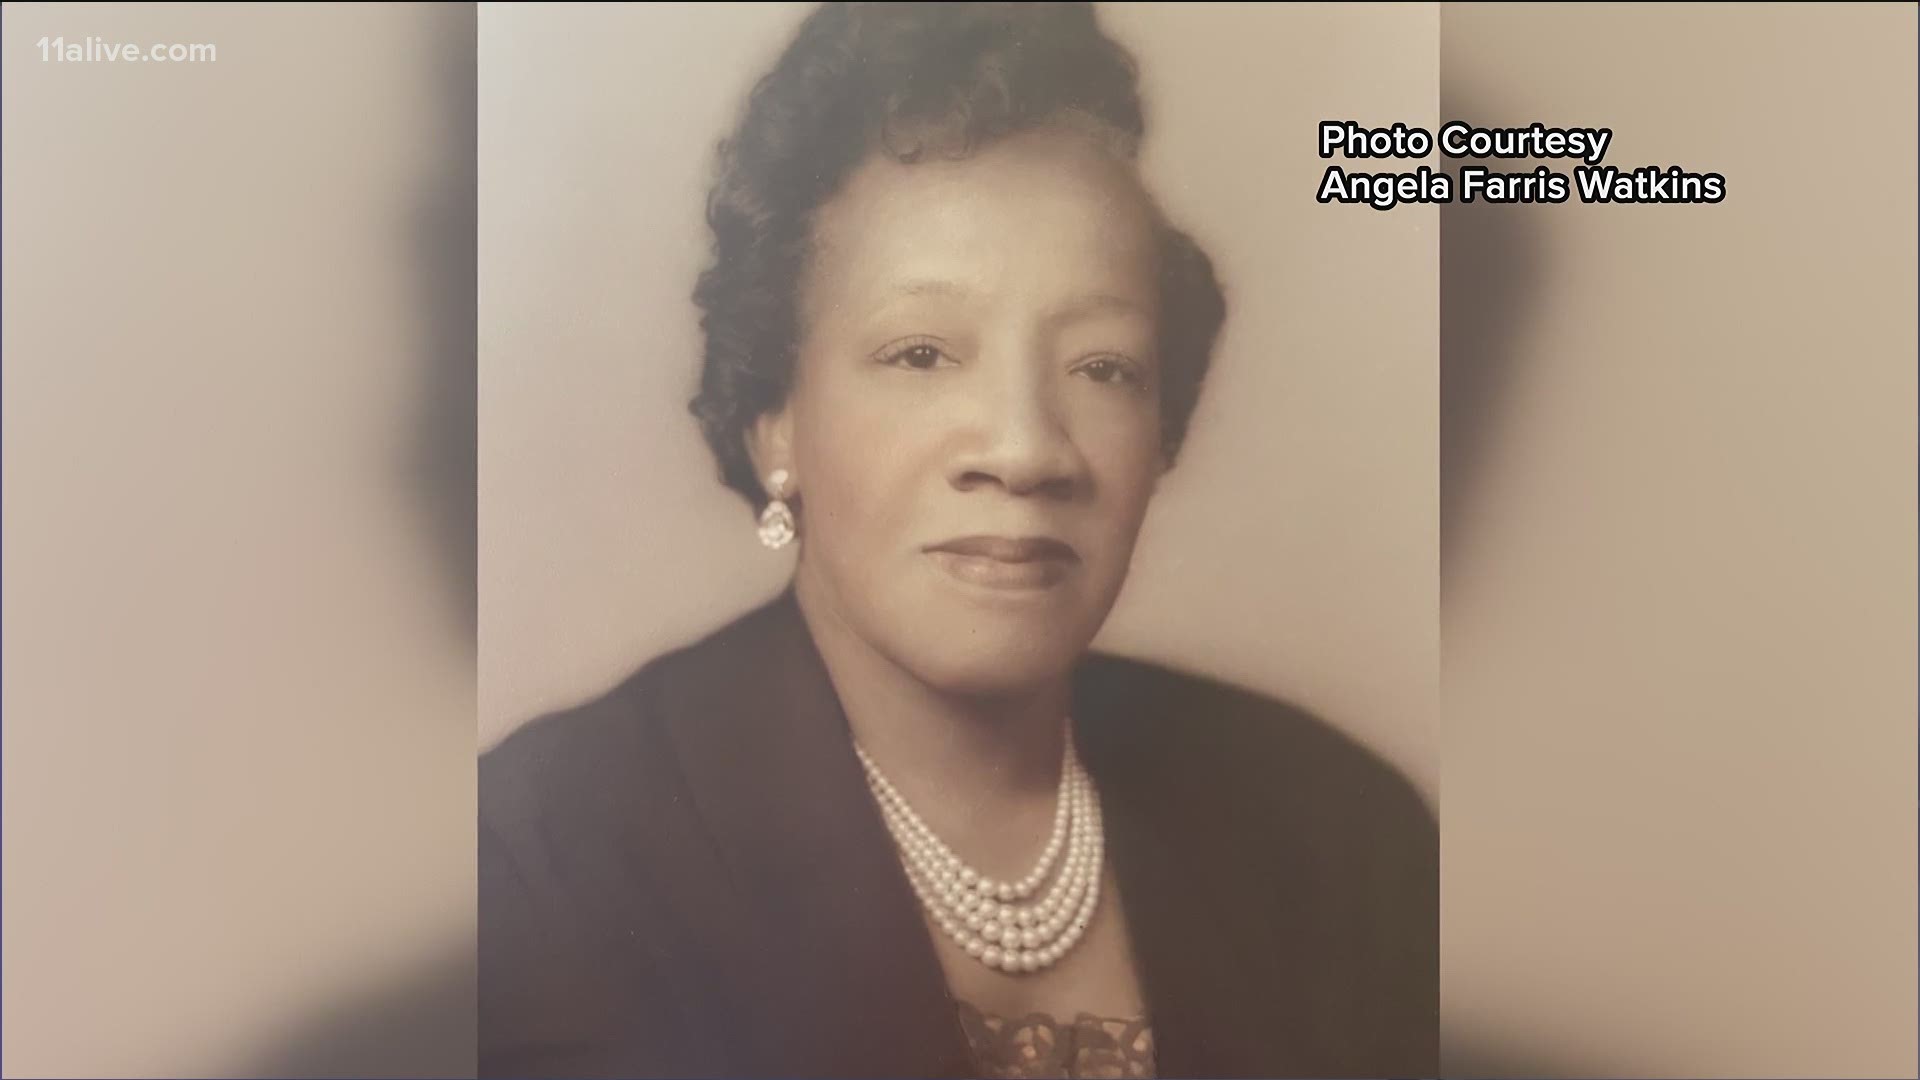 She was college-educated, lead the choir, played the church organ, and served as a proud member of the NAACP and several organizations that focused on social justice